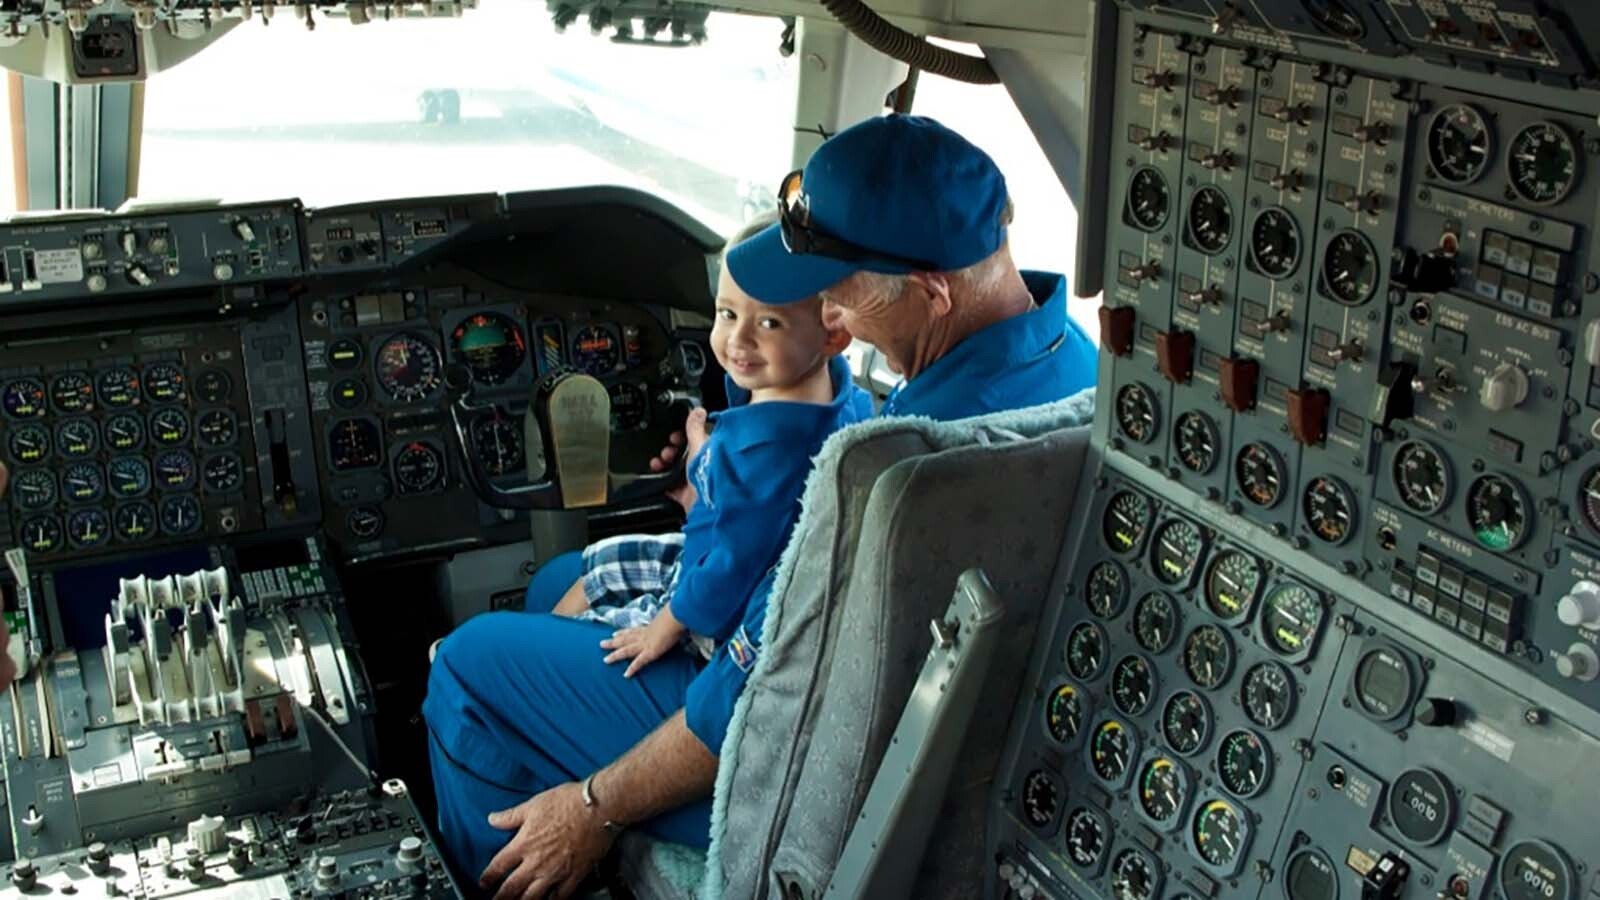 Larry LaRose with grandson Paco in the cockpit of a 747.